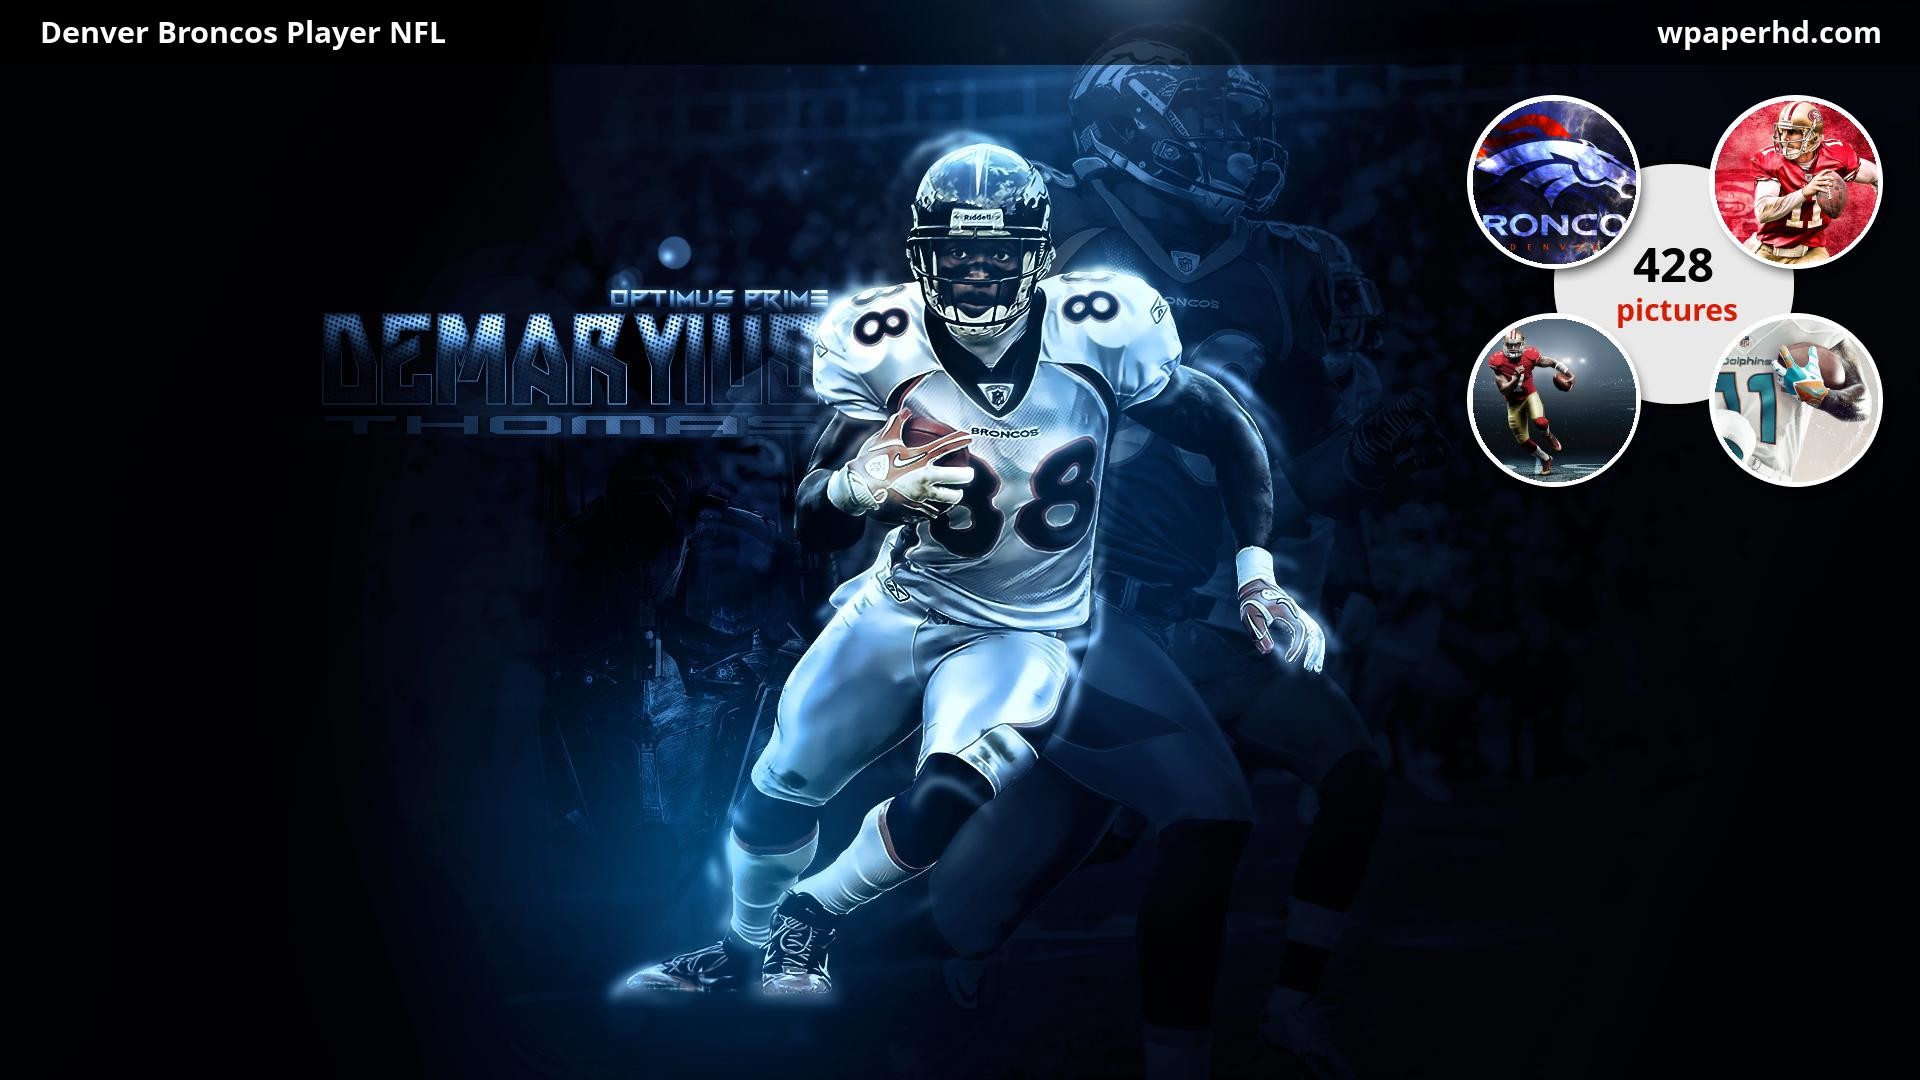 1920x1080 You are on page with Denver Broncos Player NFL wallpaper, where you can  download this picture in Original size and ...